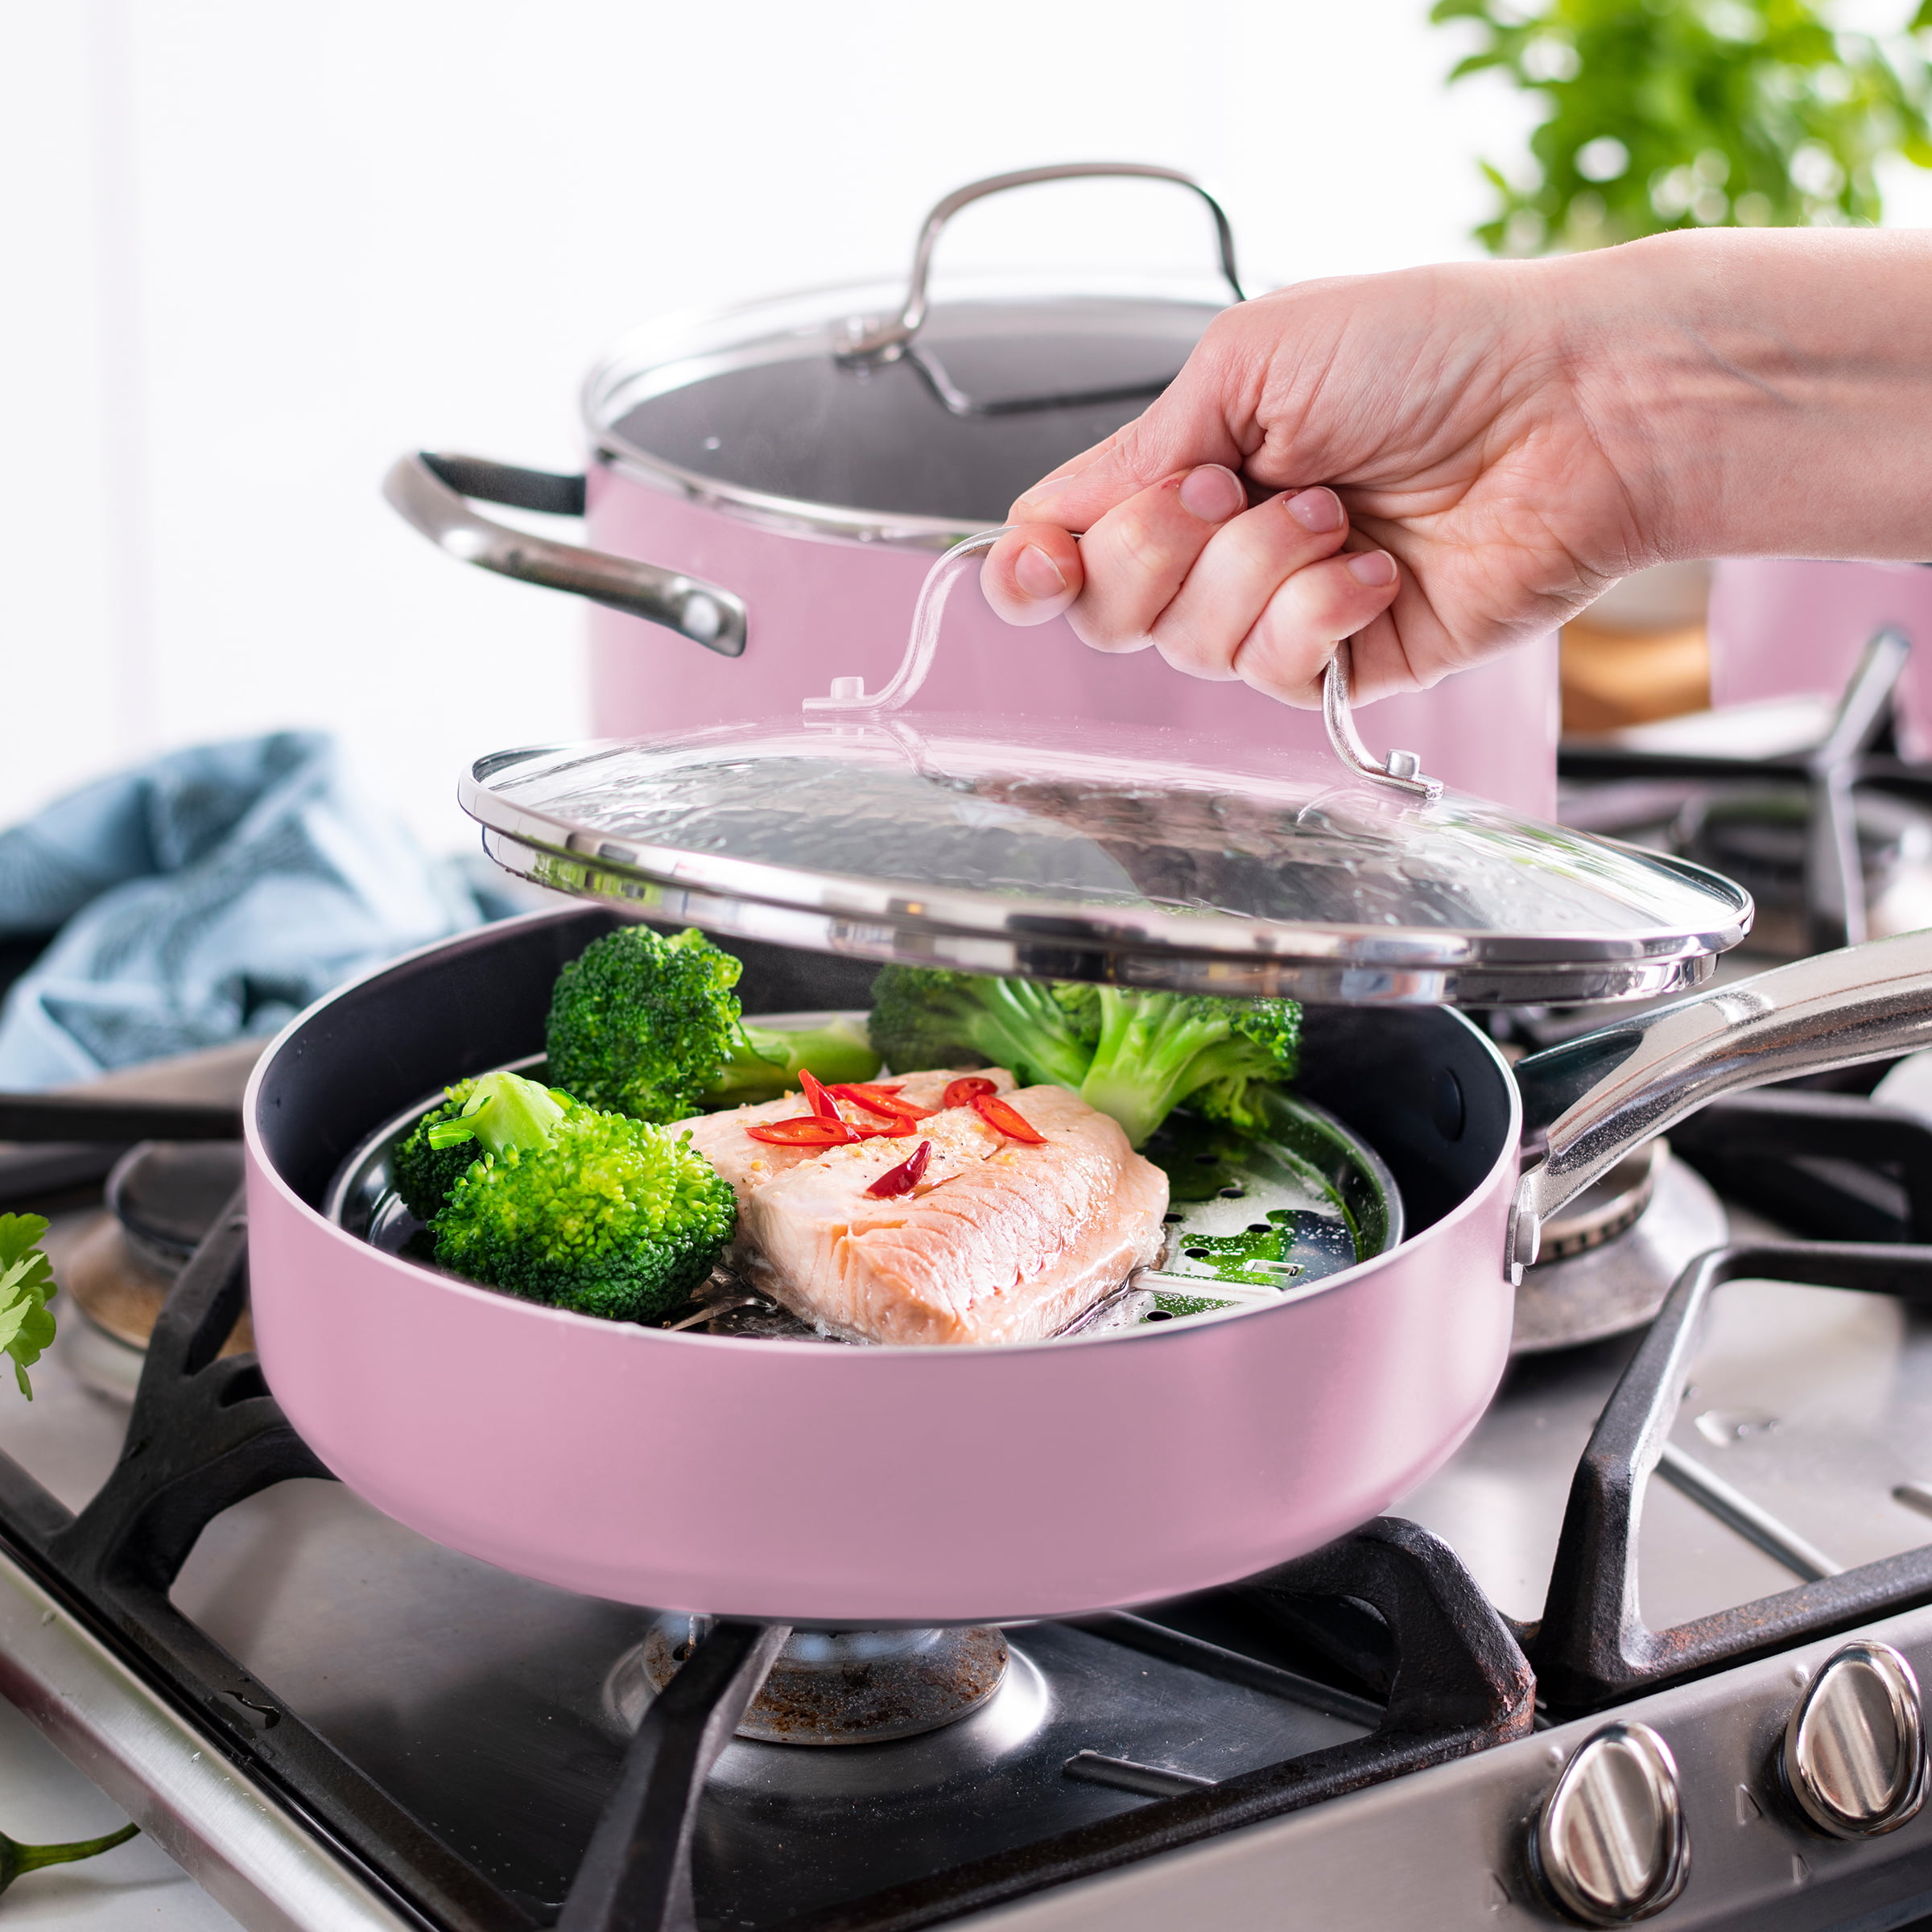 5-Piece Recycled Cast Iron Cookware Set - Dusty Pink